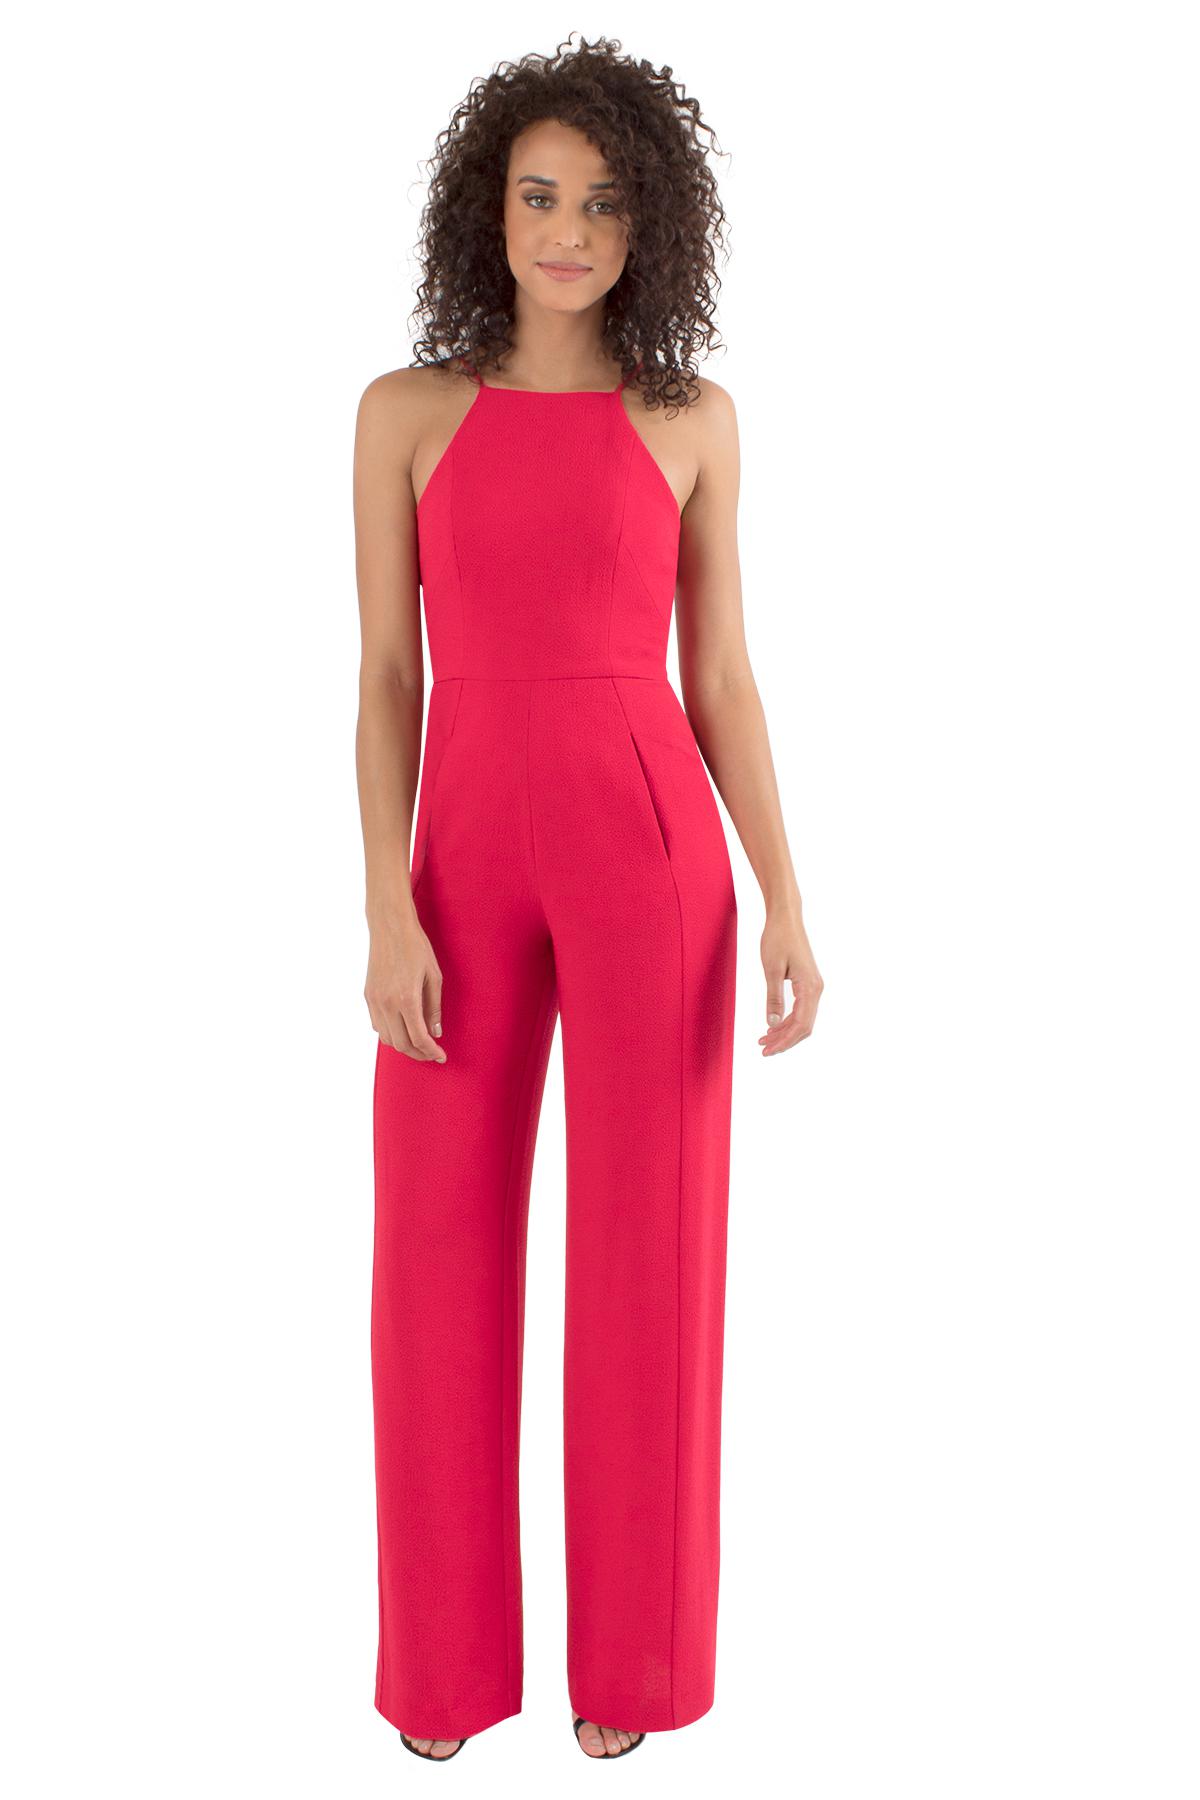 Lyst - Black Halo Joaquin Jumpsuit in Red